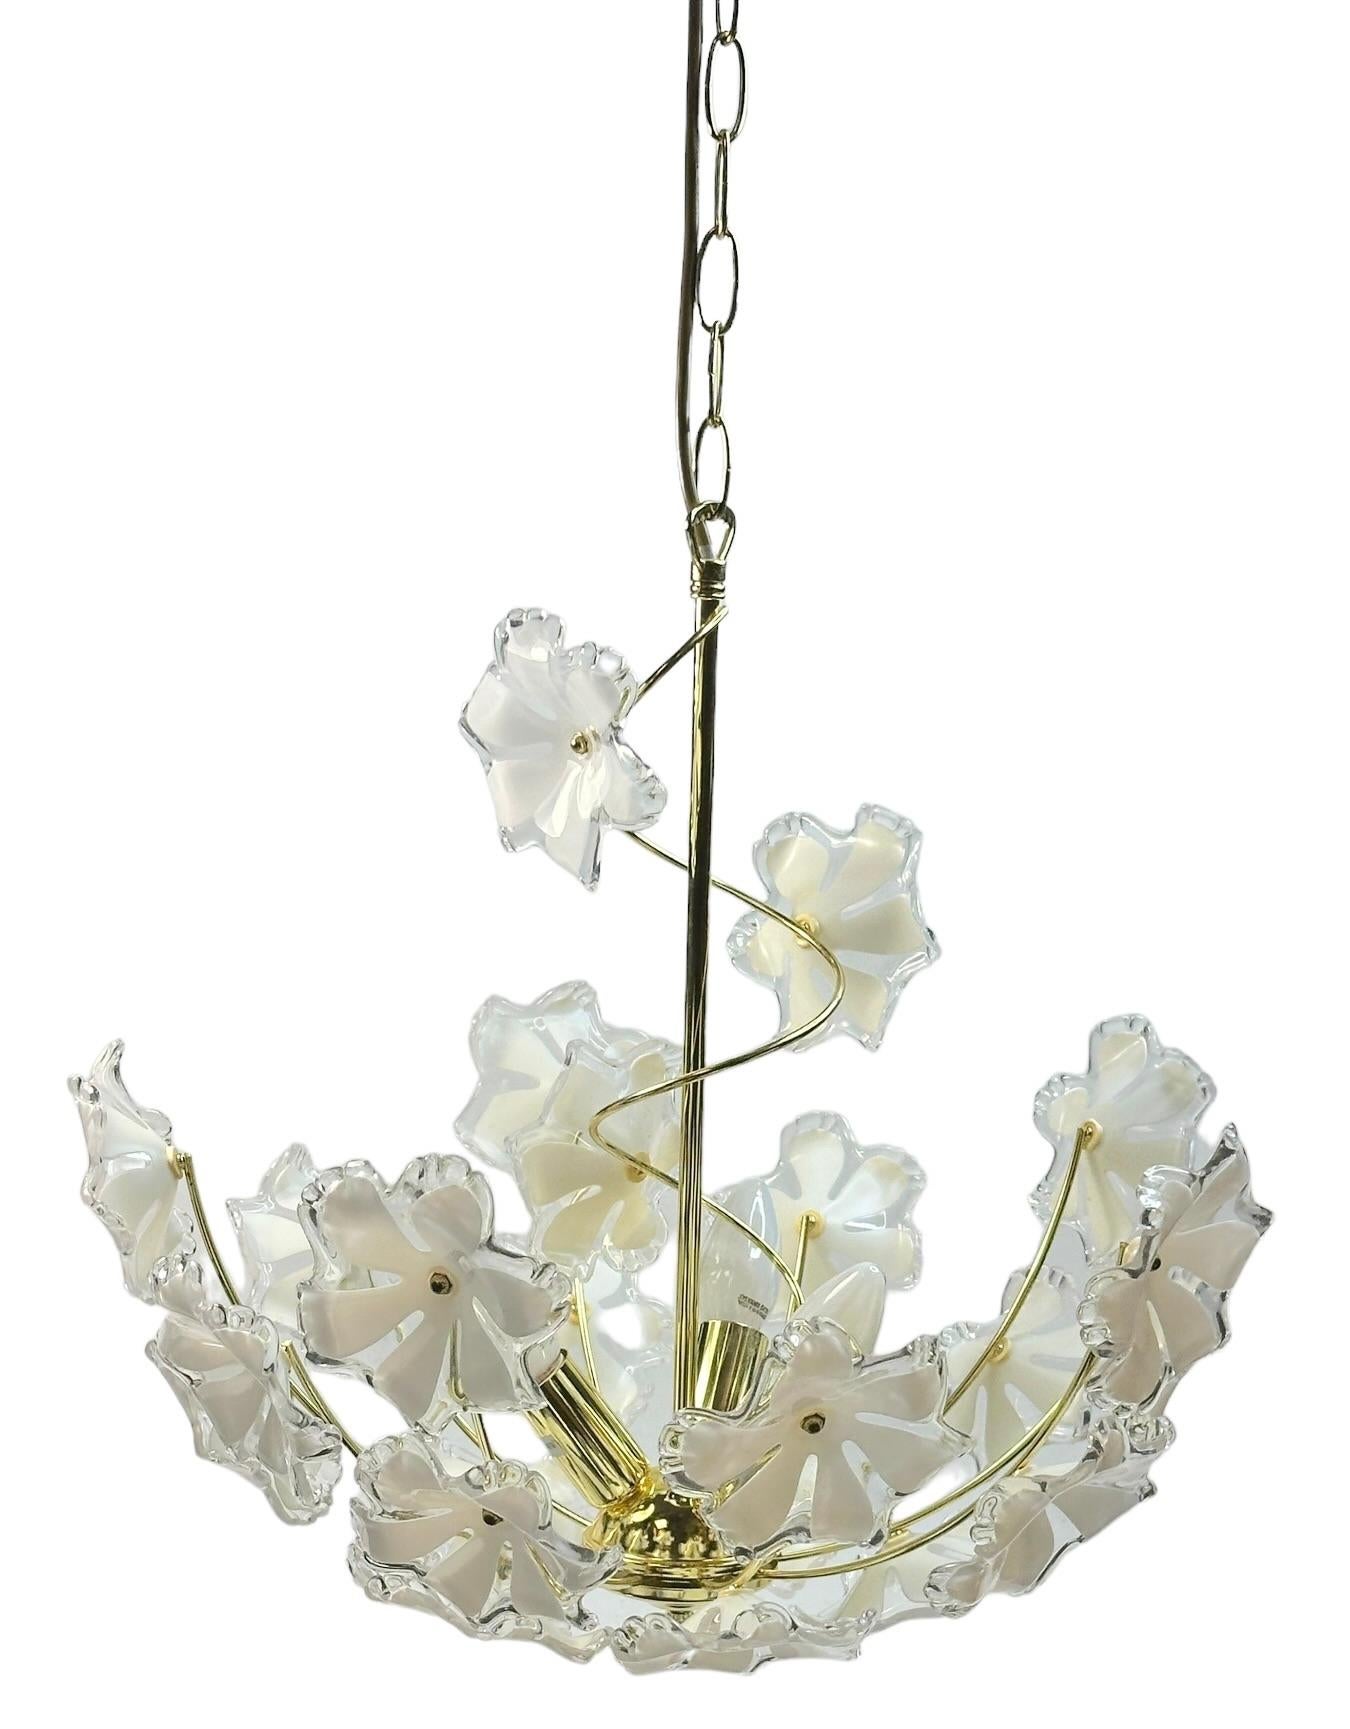 A beautiful ceiling light, made in Austria in the 1970s. Some beautiful lucite flowers. The Fixture requires three European E14 / 110 Volt Candelabra bulbs, each bulb up to 40 watts. A nice addition to every room. Found at an Estate sale in